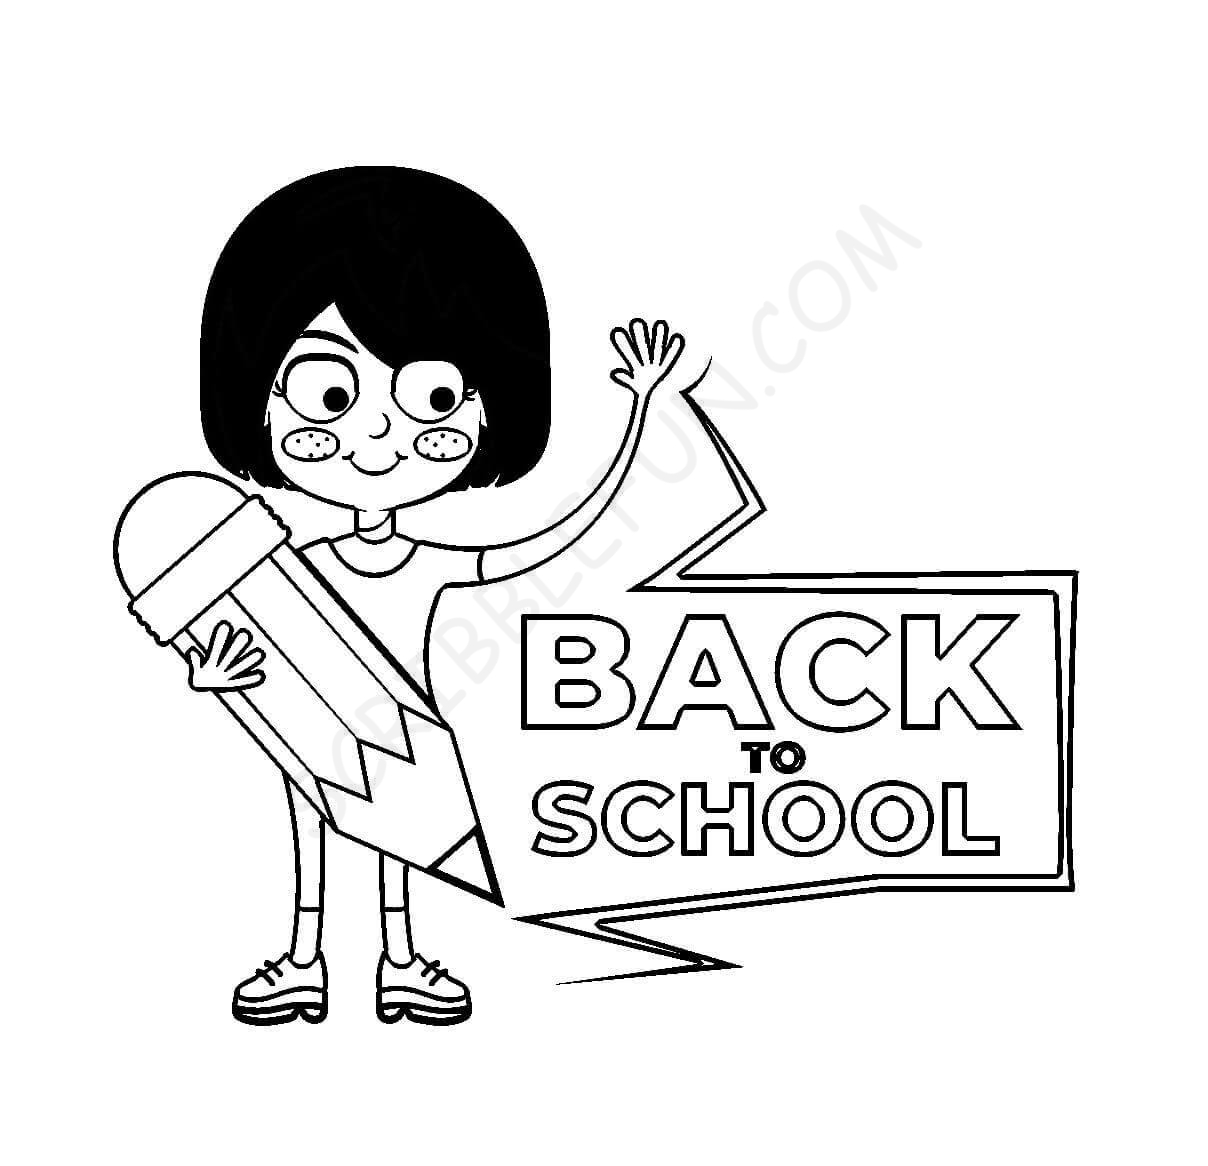 Welcome back to school coloring pages